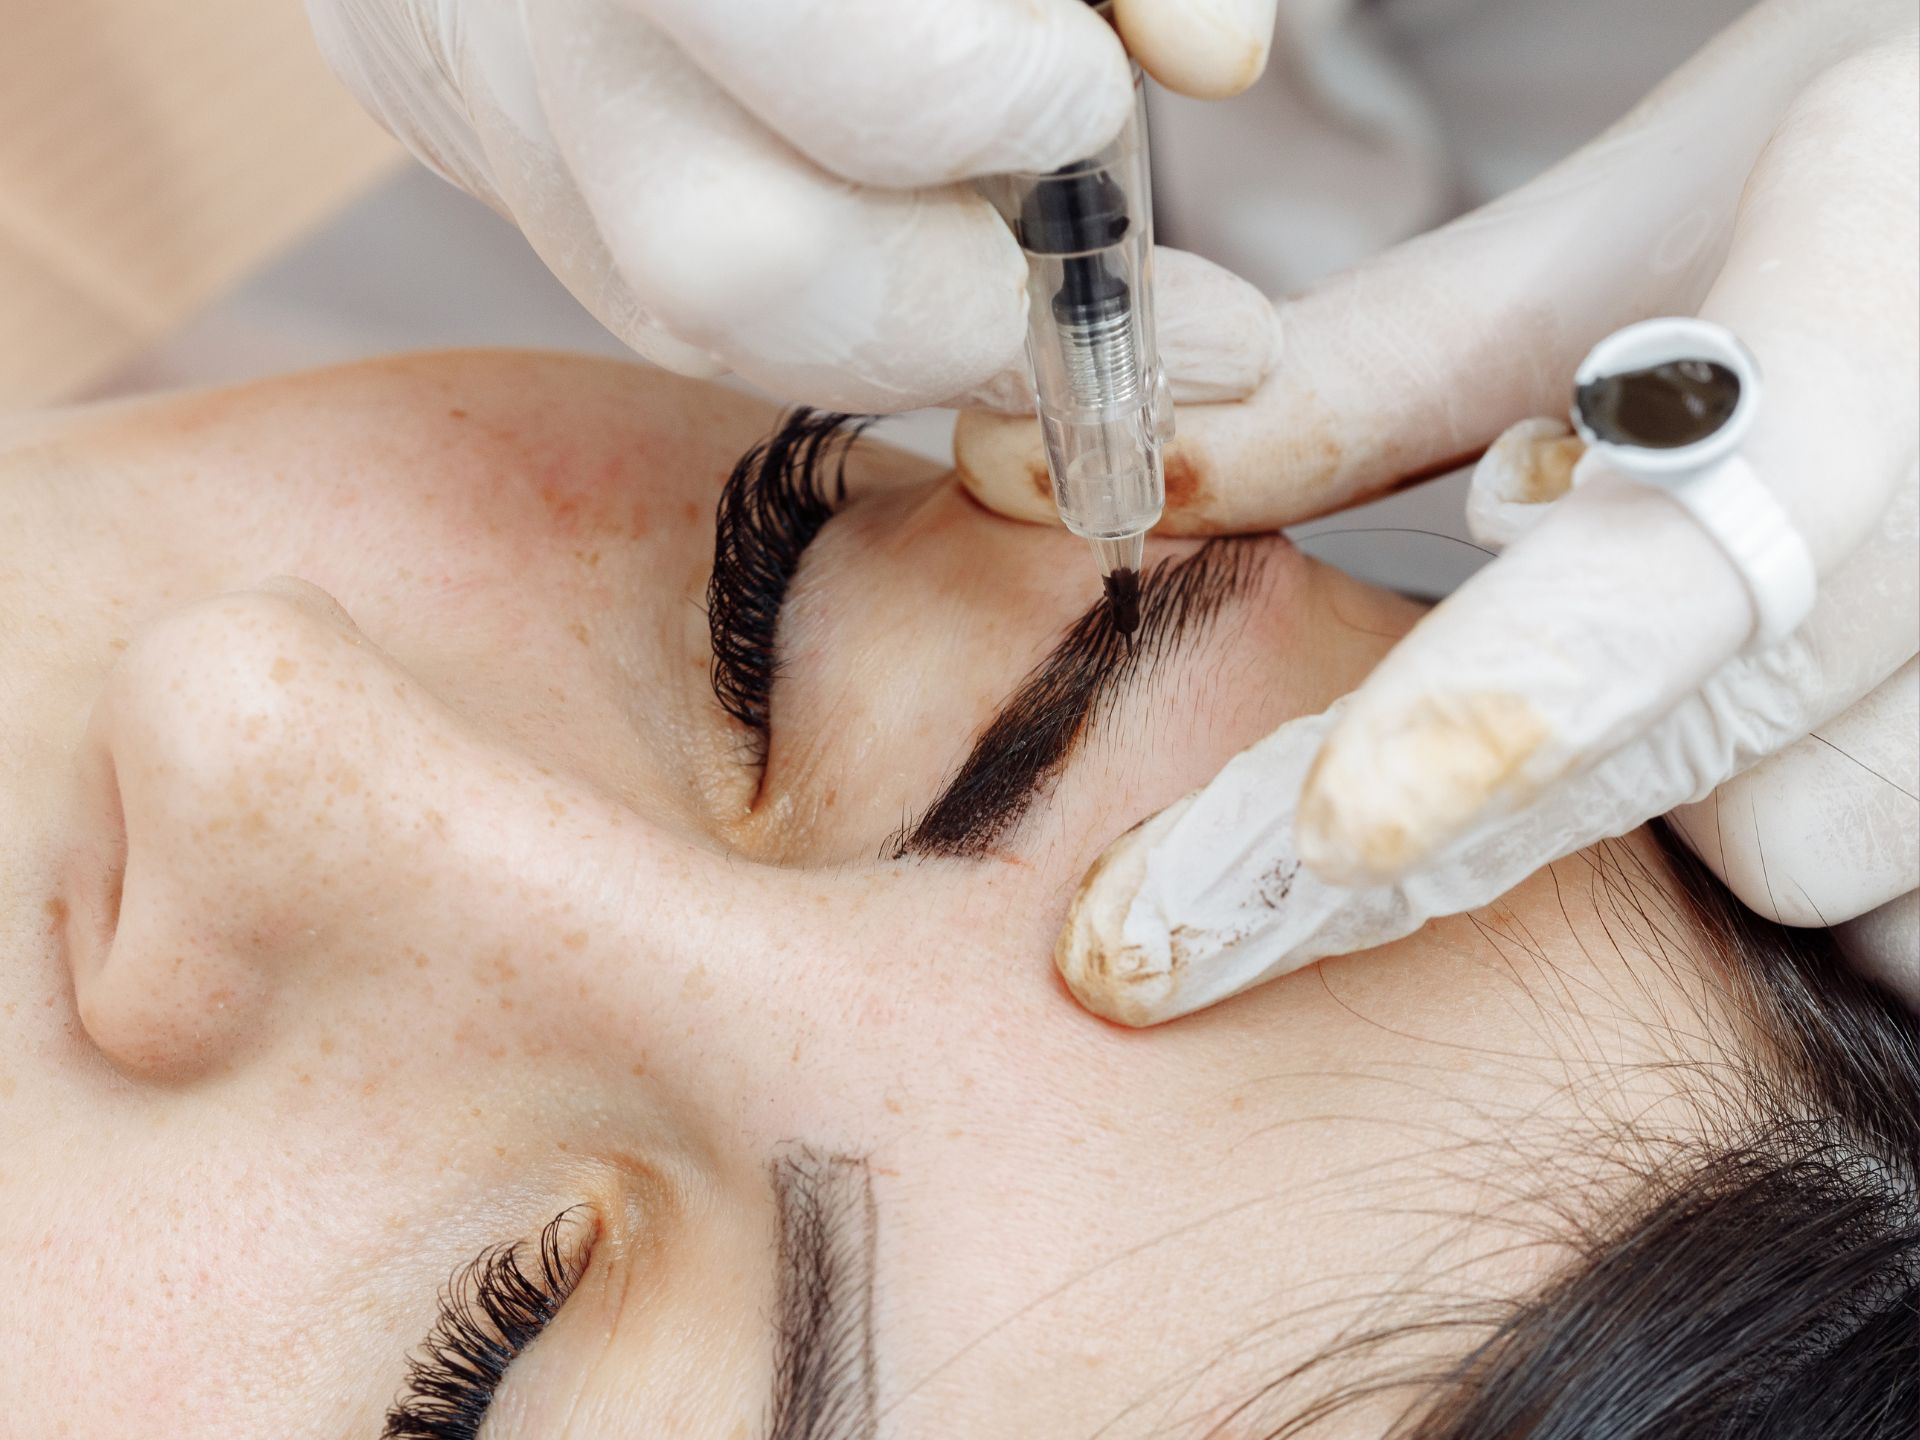 Permanent Makeup Artist applying pigment to eyebrows with permanent makeup pen. 